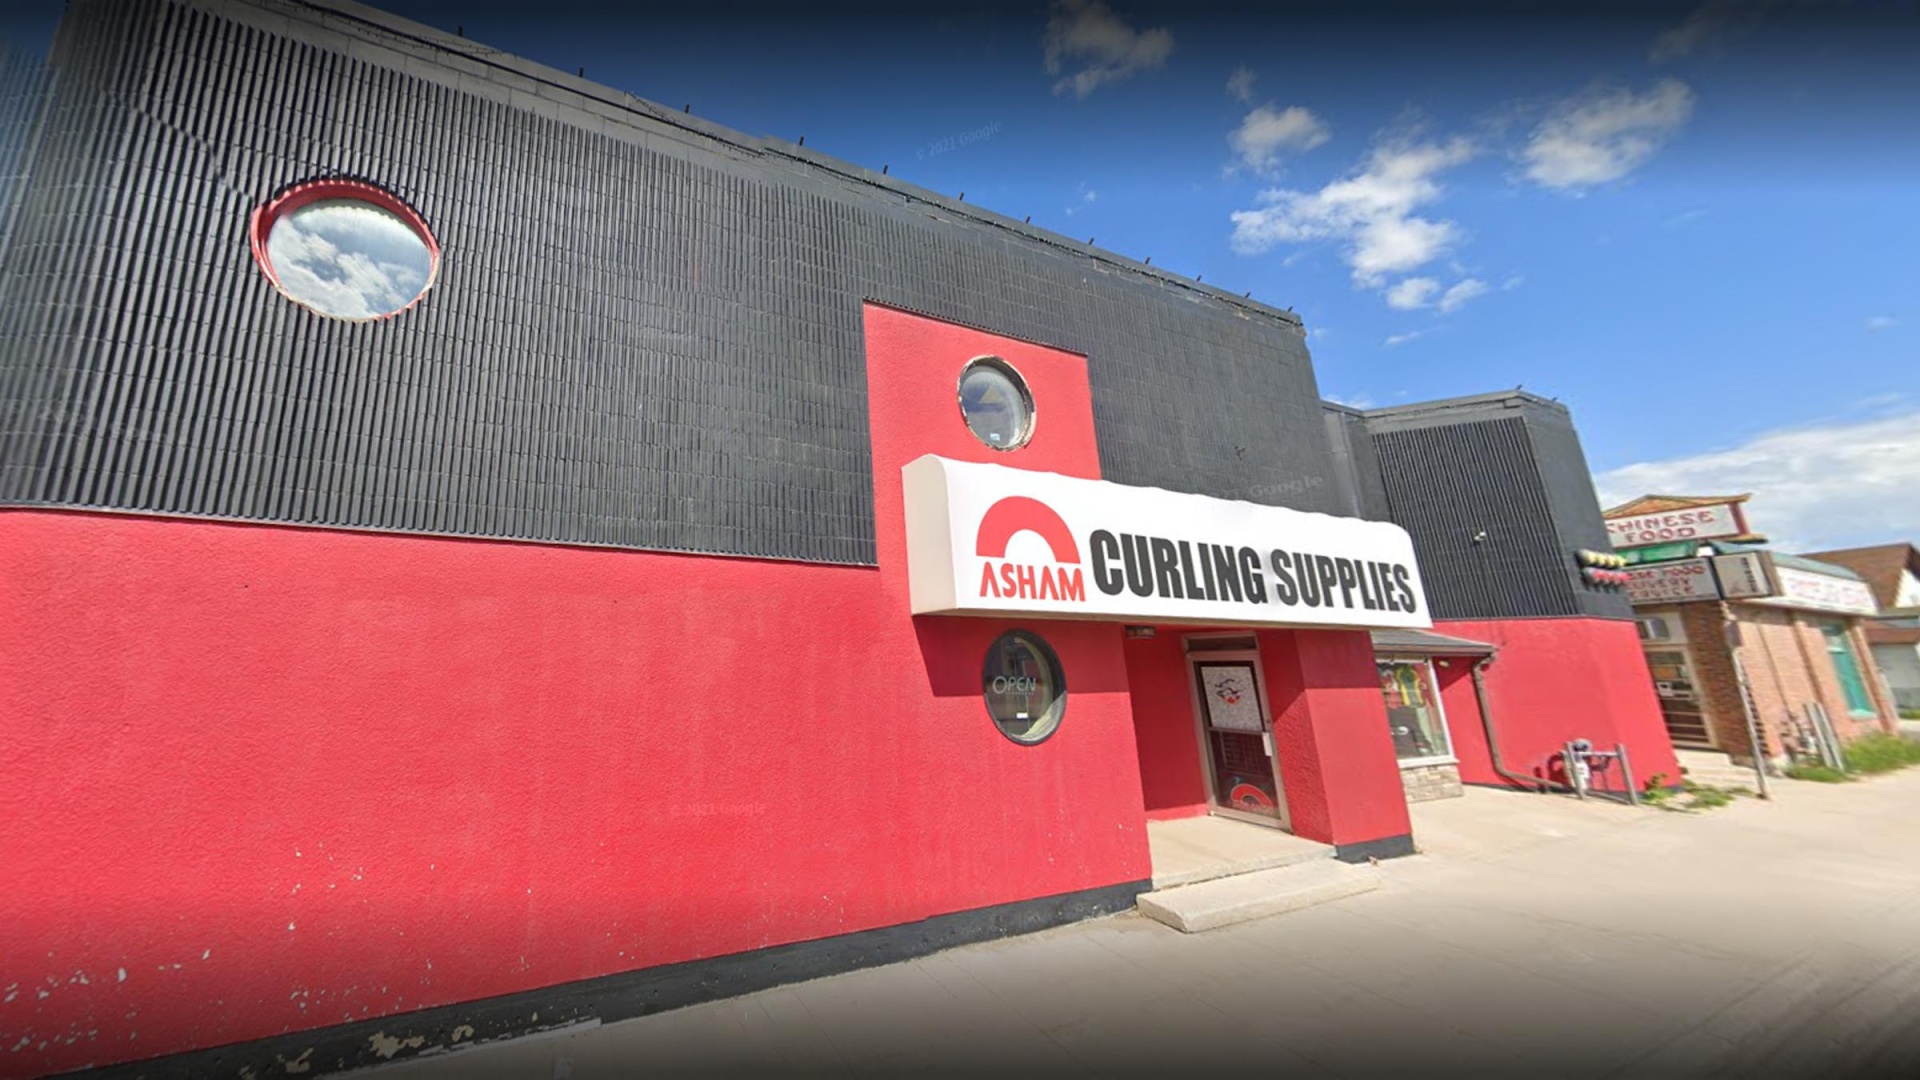 PROJECT FEATURE: ASHAM CURLING SUPPLIES